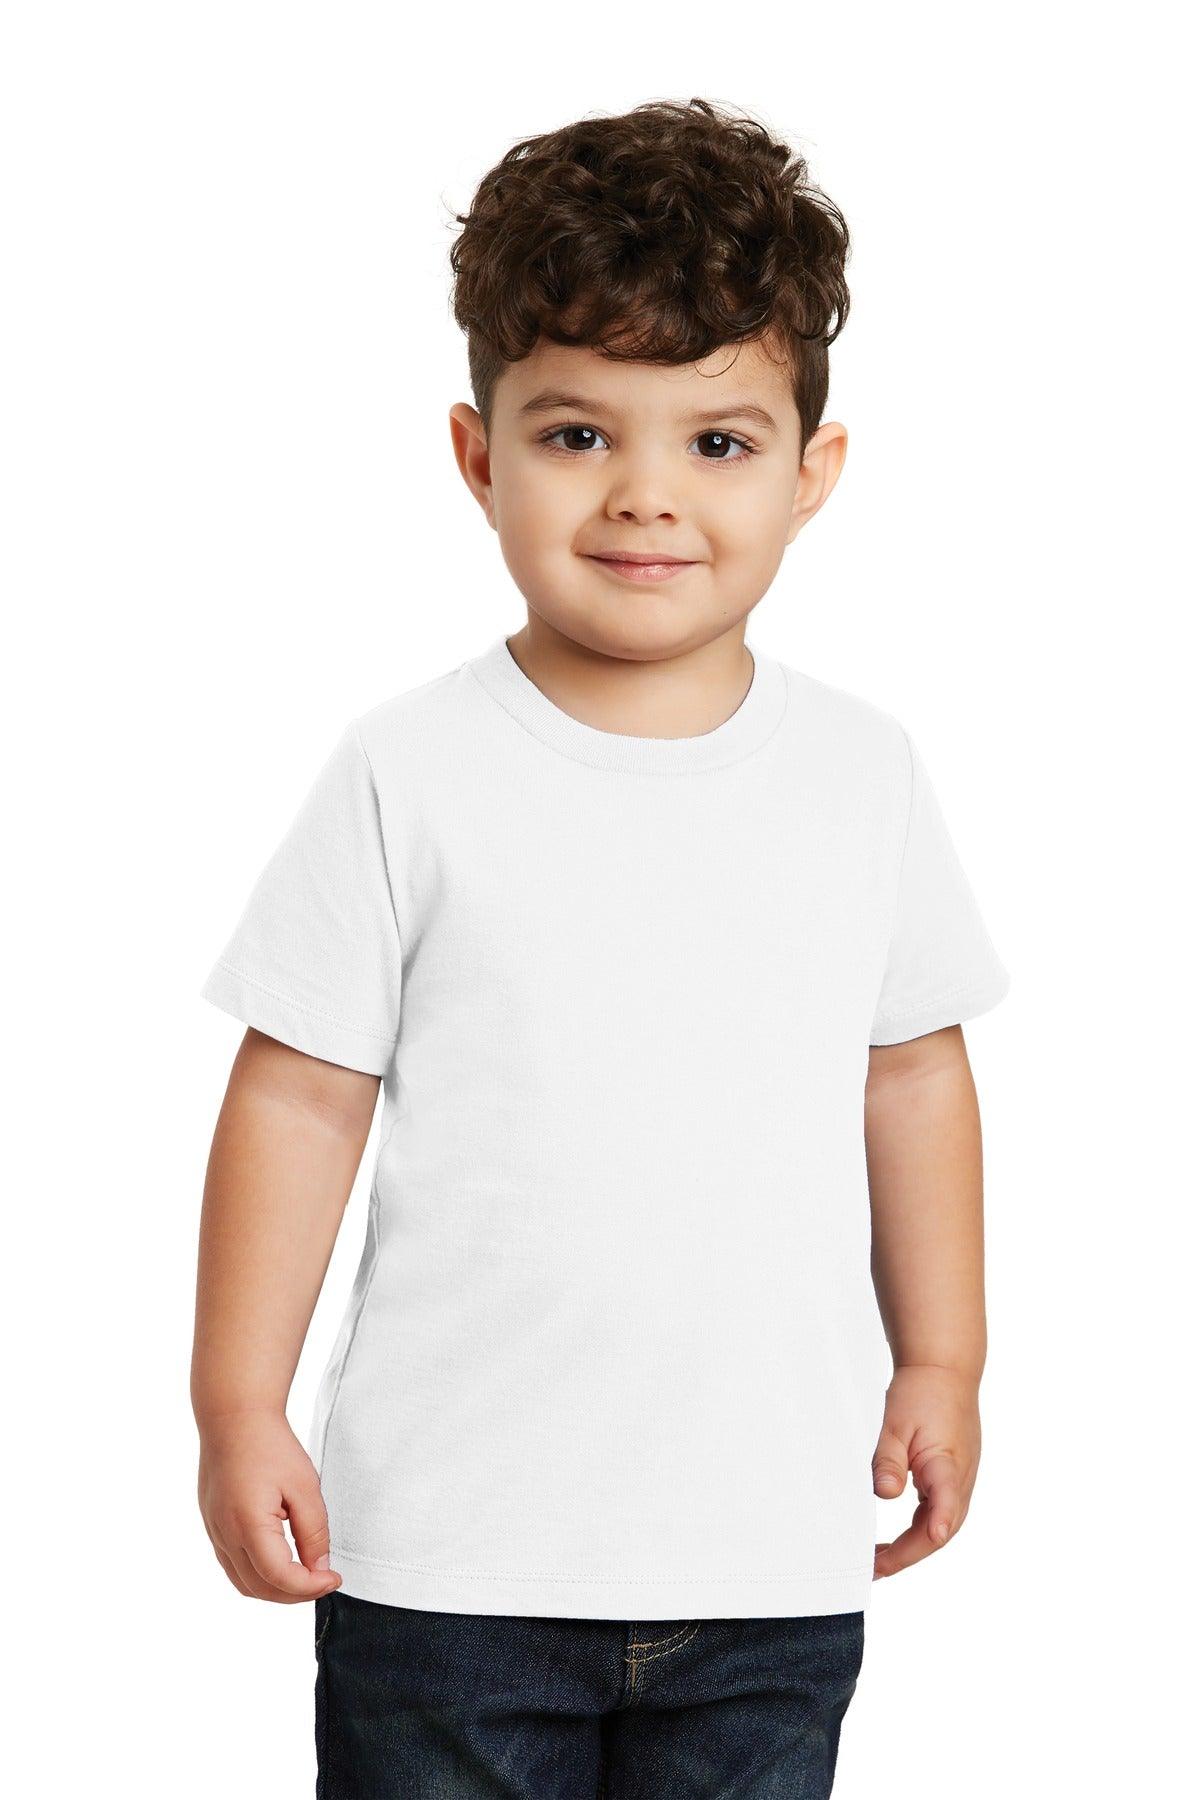 Port & Company Toddler Fan Favorite Tee. PC450TD - Dresses Max